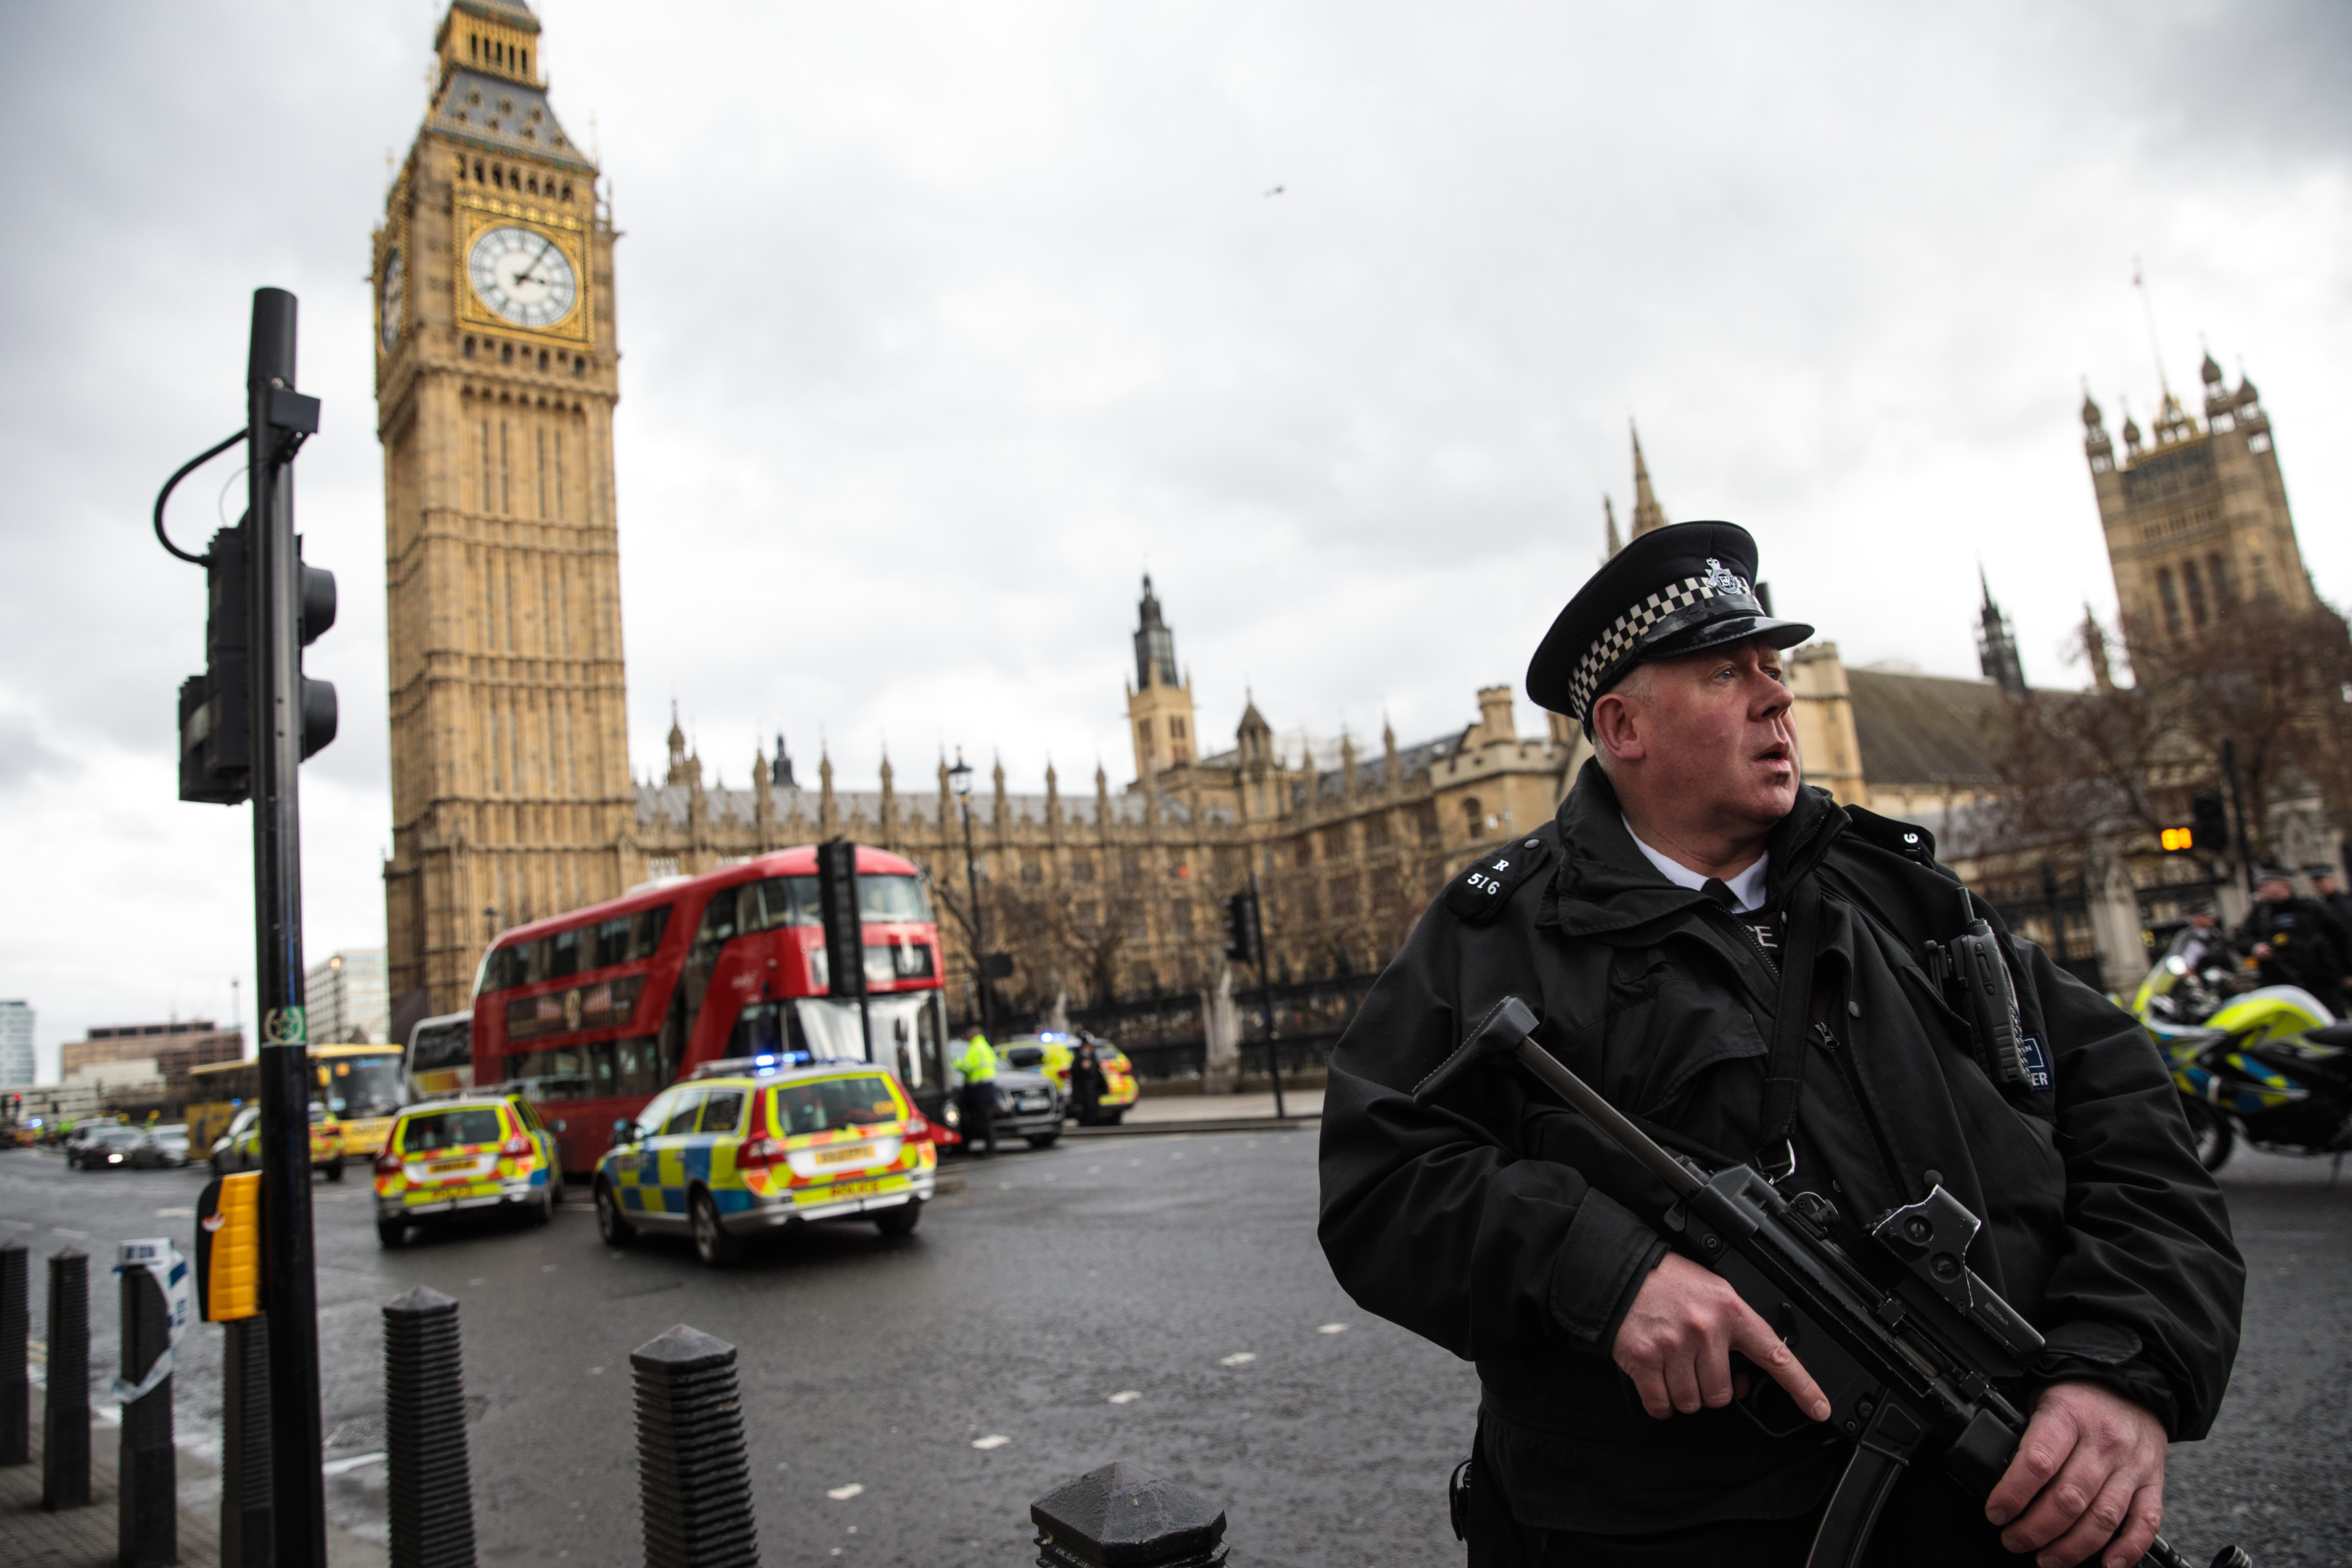 An armed police officer stands guard near Westminster Bridge (Jack Taylor/Getty Images)